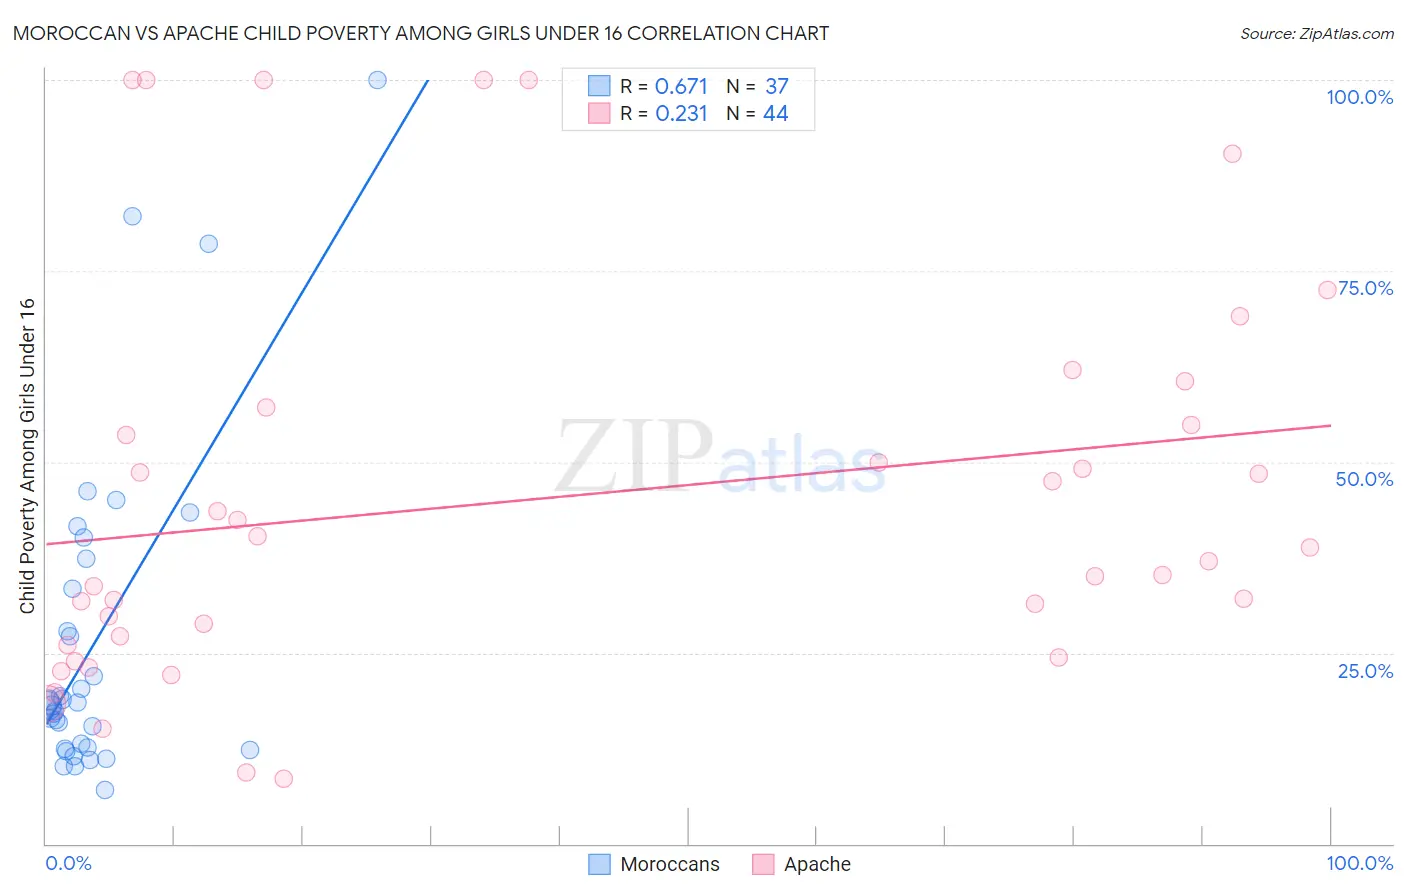 Moroccan vs Apache Child Poverty Among Girls Under 16